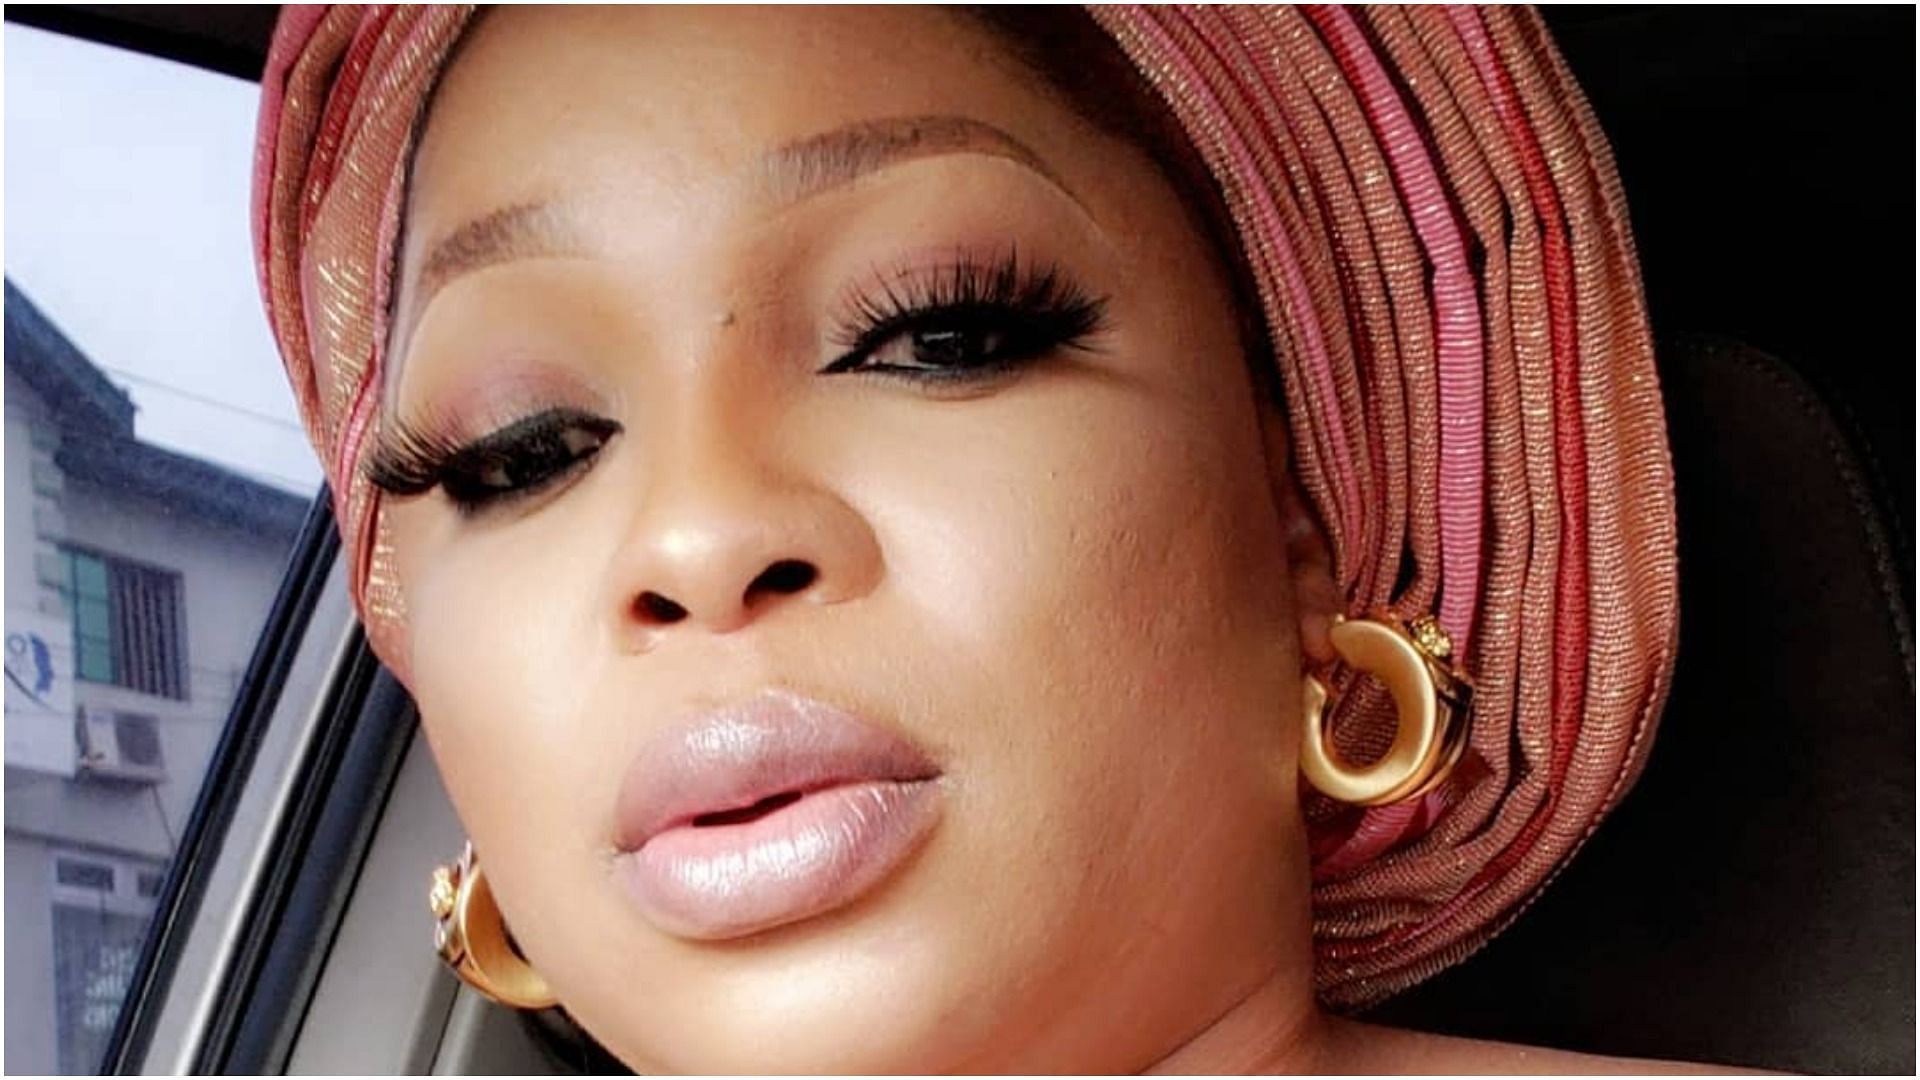 Kemi Afolabi has been diagnosed with cancer and has five years to live (Image via Kemi Afolabi/Facebook)